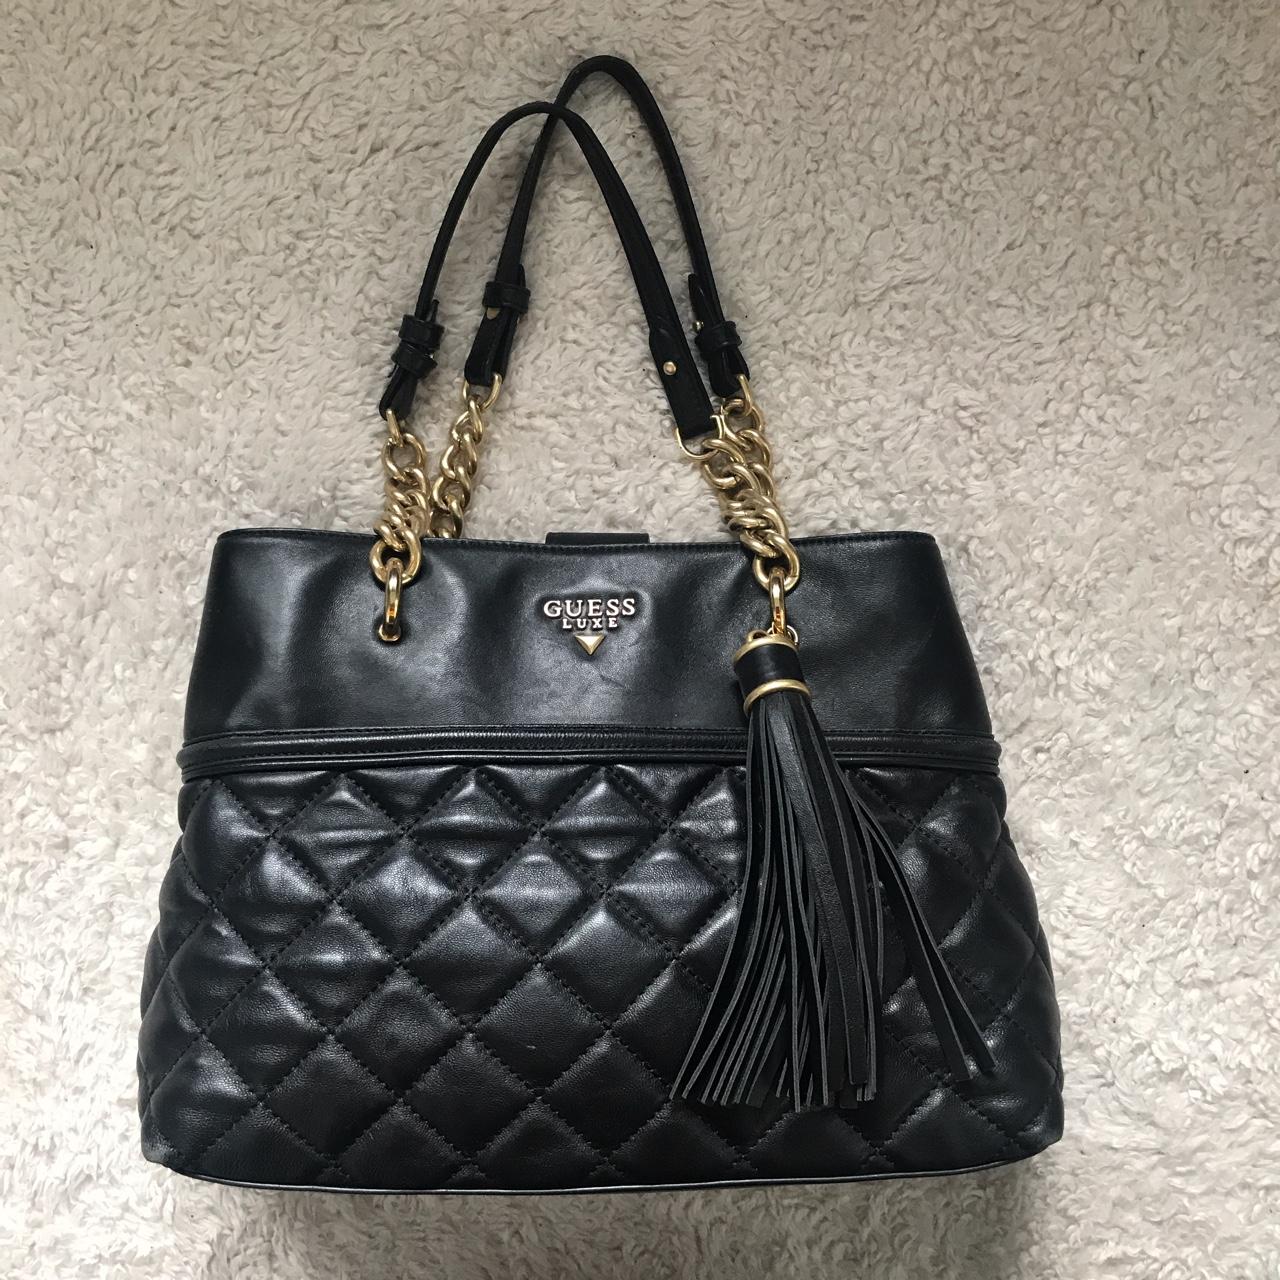 Bag Guess Luxe Black